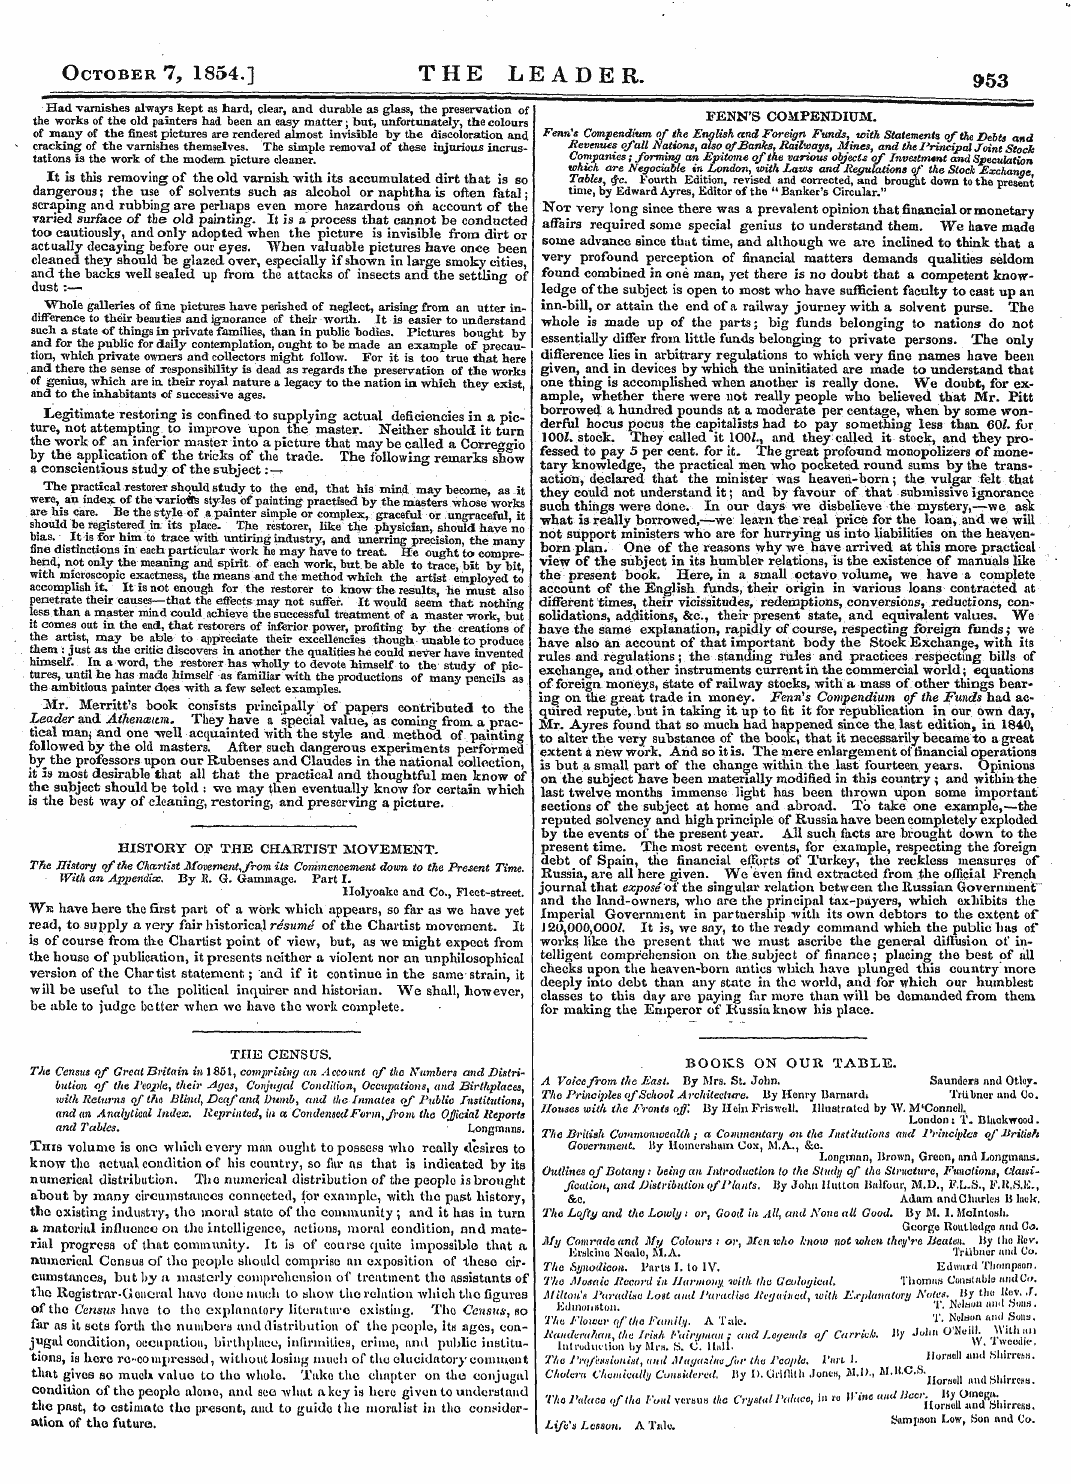 Leader (1850-1860): jS F Y, Country edition - October 7, 1854.] The Leader. 953